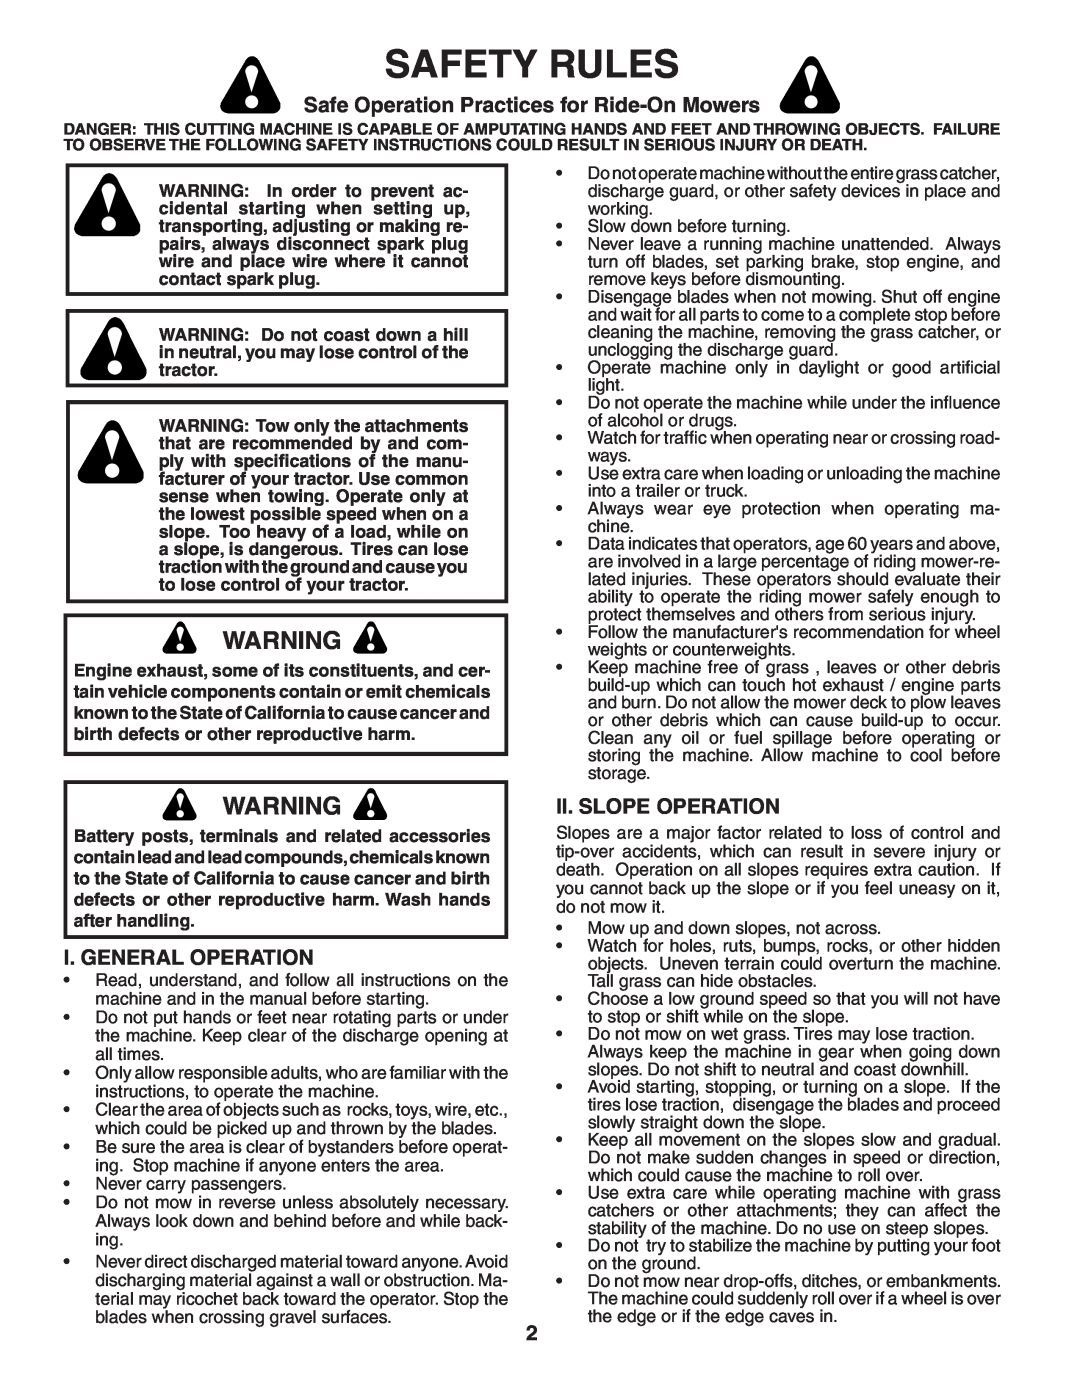 Poulan 405035 manual Safety Rules, Safe Operation Practices for Ride-On Mowers, I. General Operation, Ii. Slope Operation 